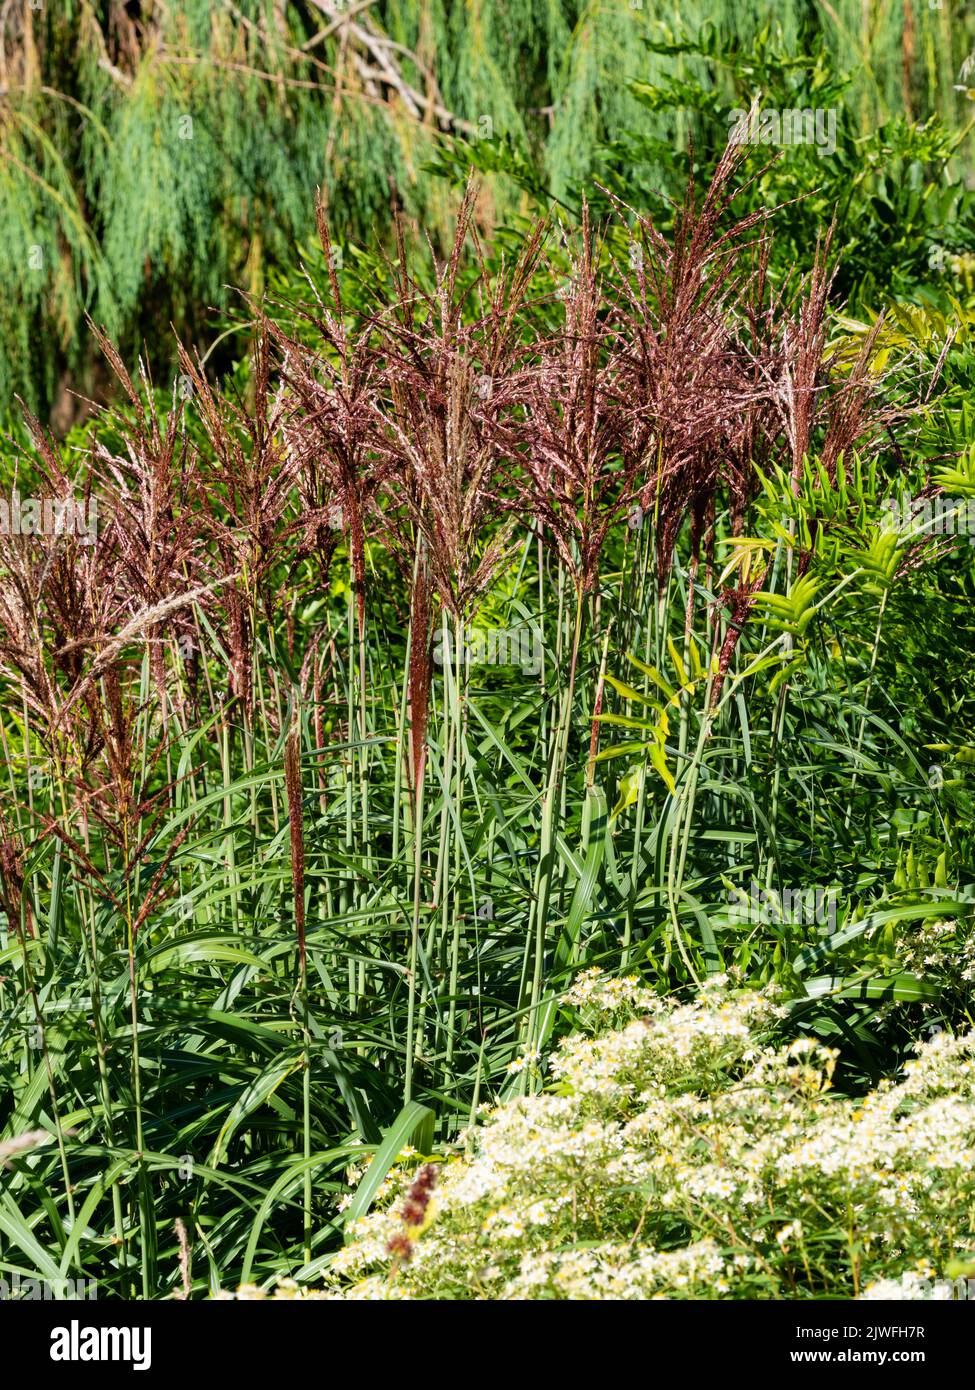 Late summer red-pink flower heads of the clumping ornamental hardy grass, Miscanthus sinensis 'Flamingo' Stock Photo